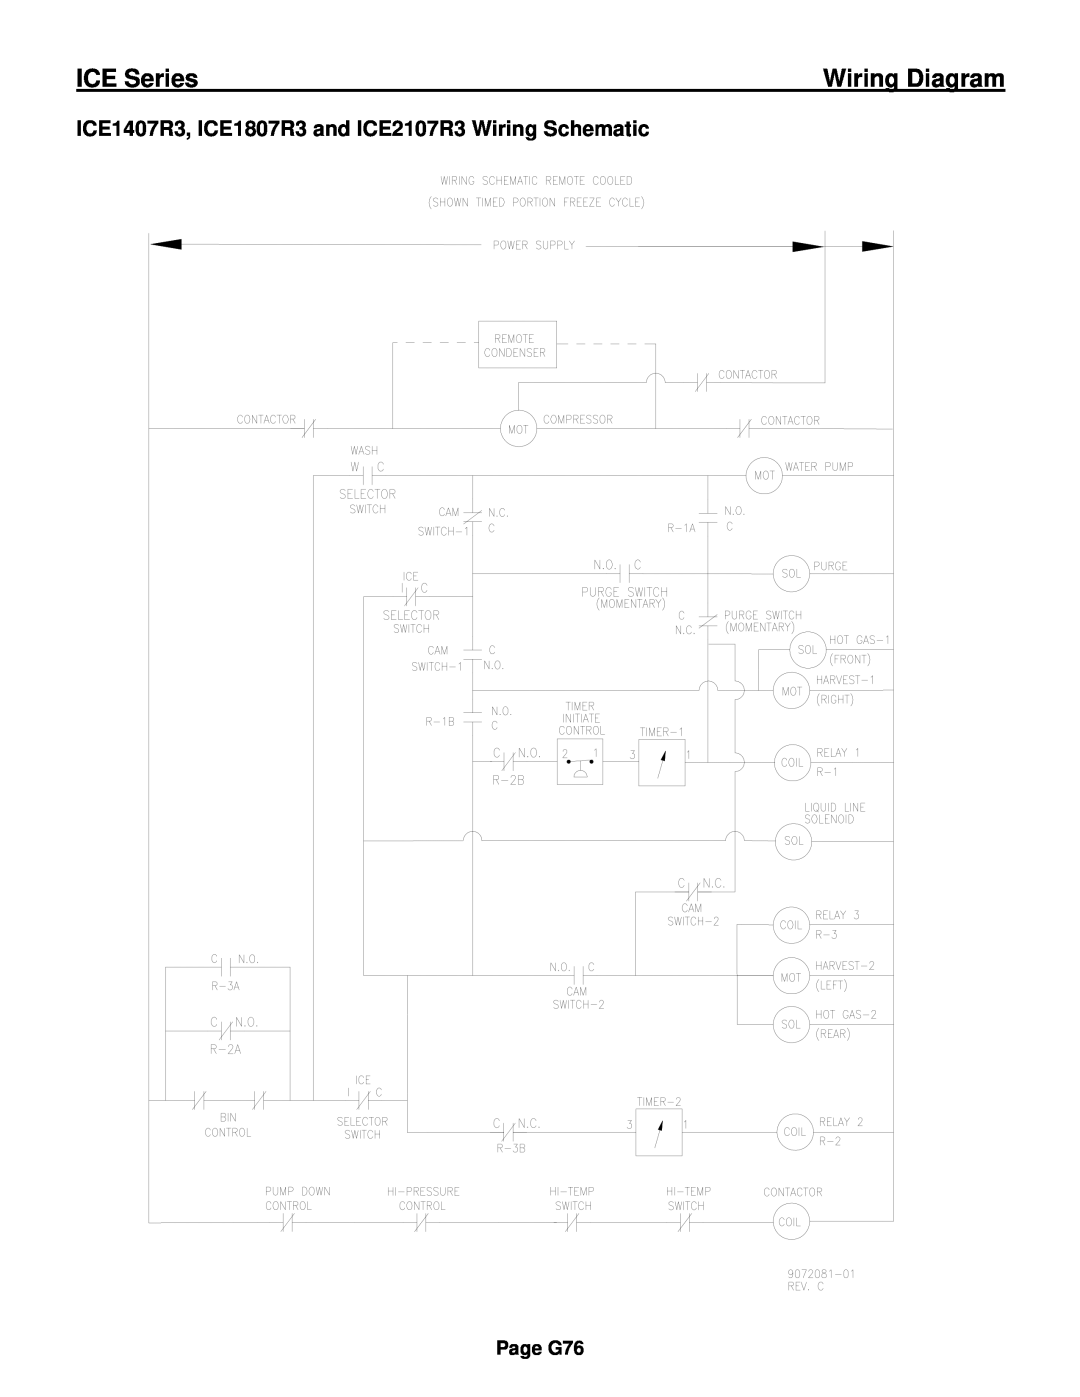 Ice-O-Matic ICE0250 Series ICE1407R3, ICE1807R3 and ICE2107R3 Wiring Schematic, ICE Series, Wiring Diagram, Page G76 